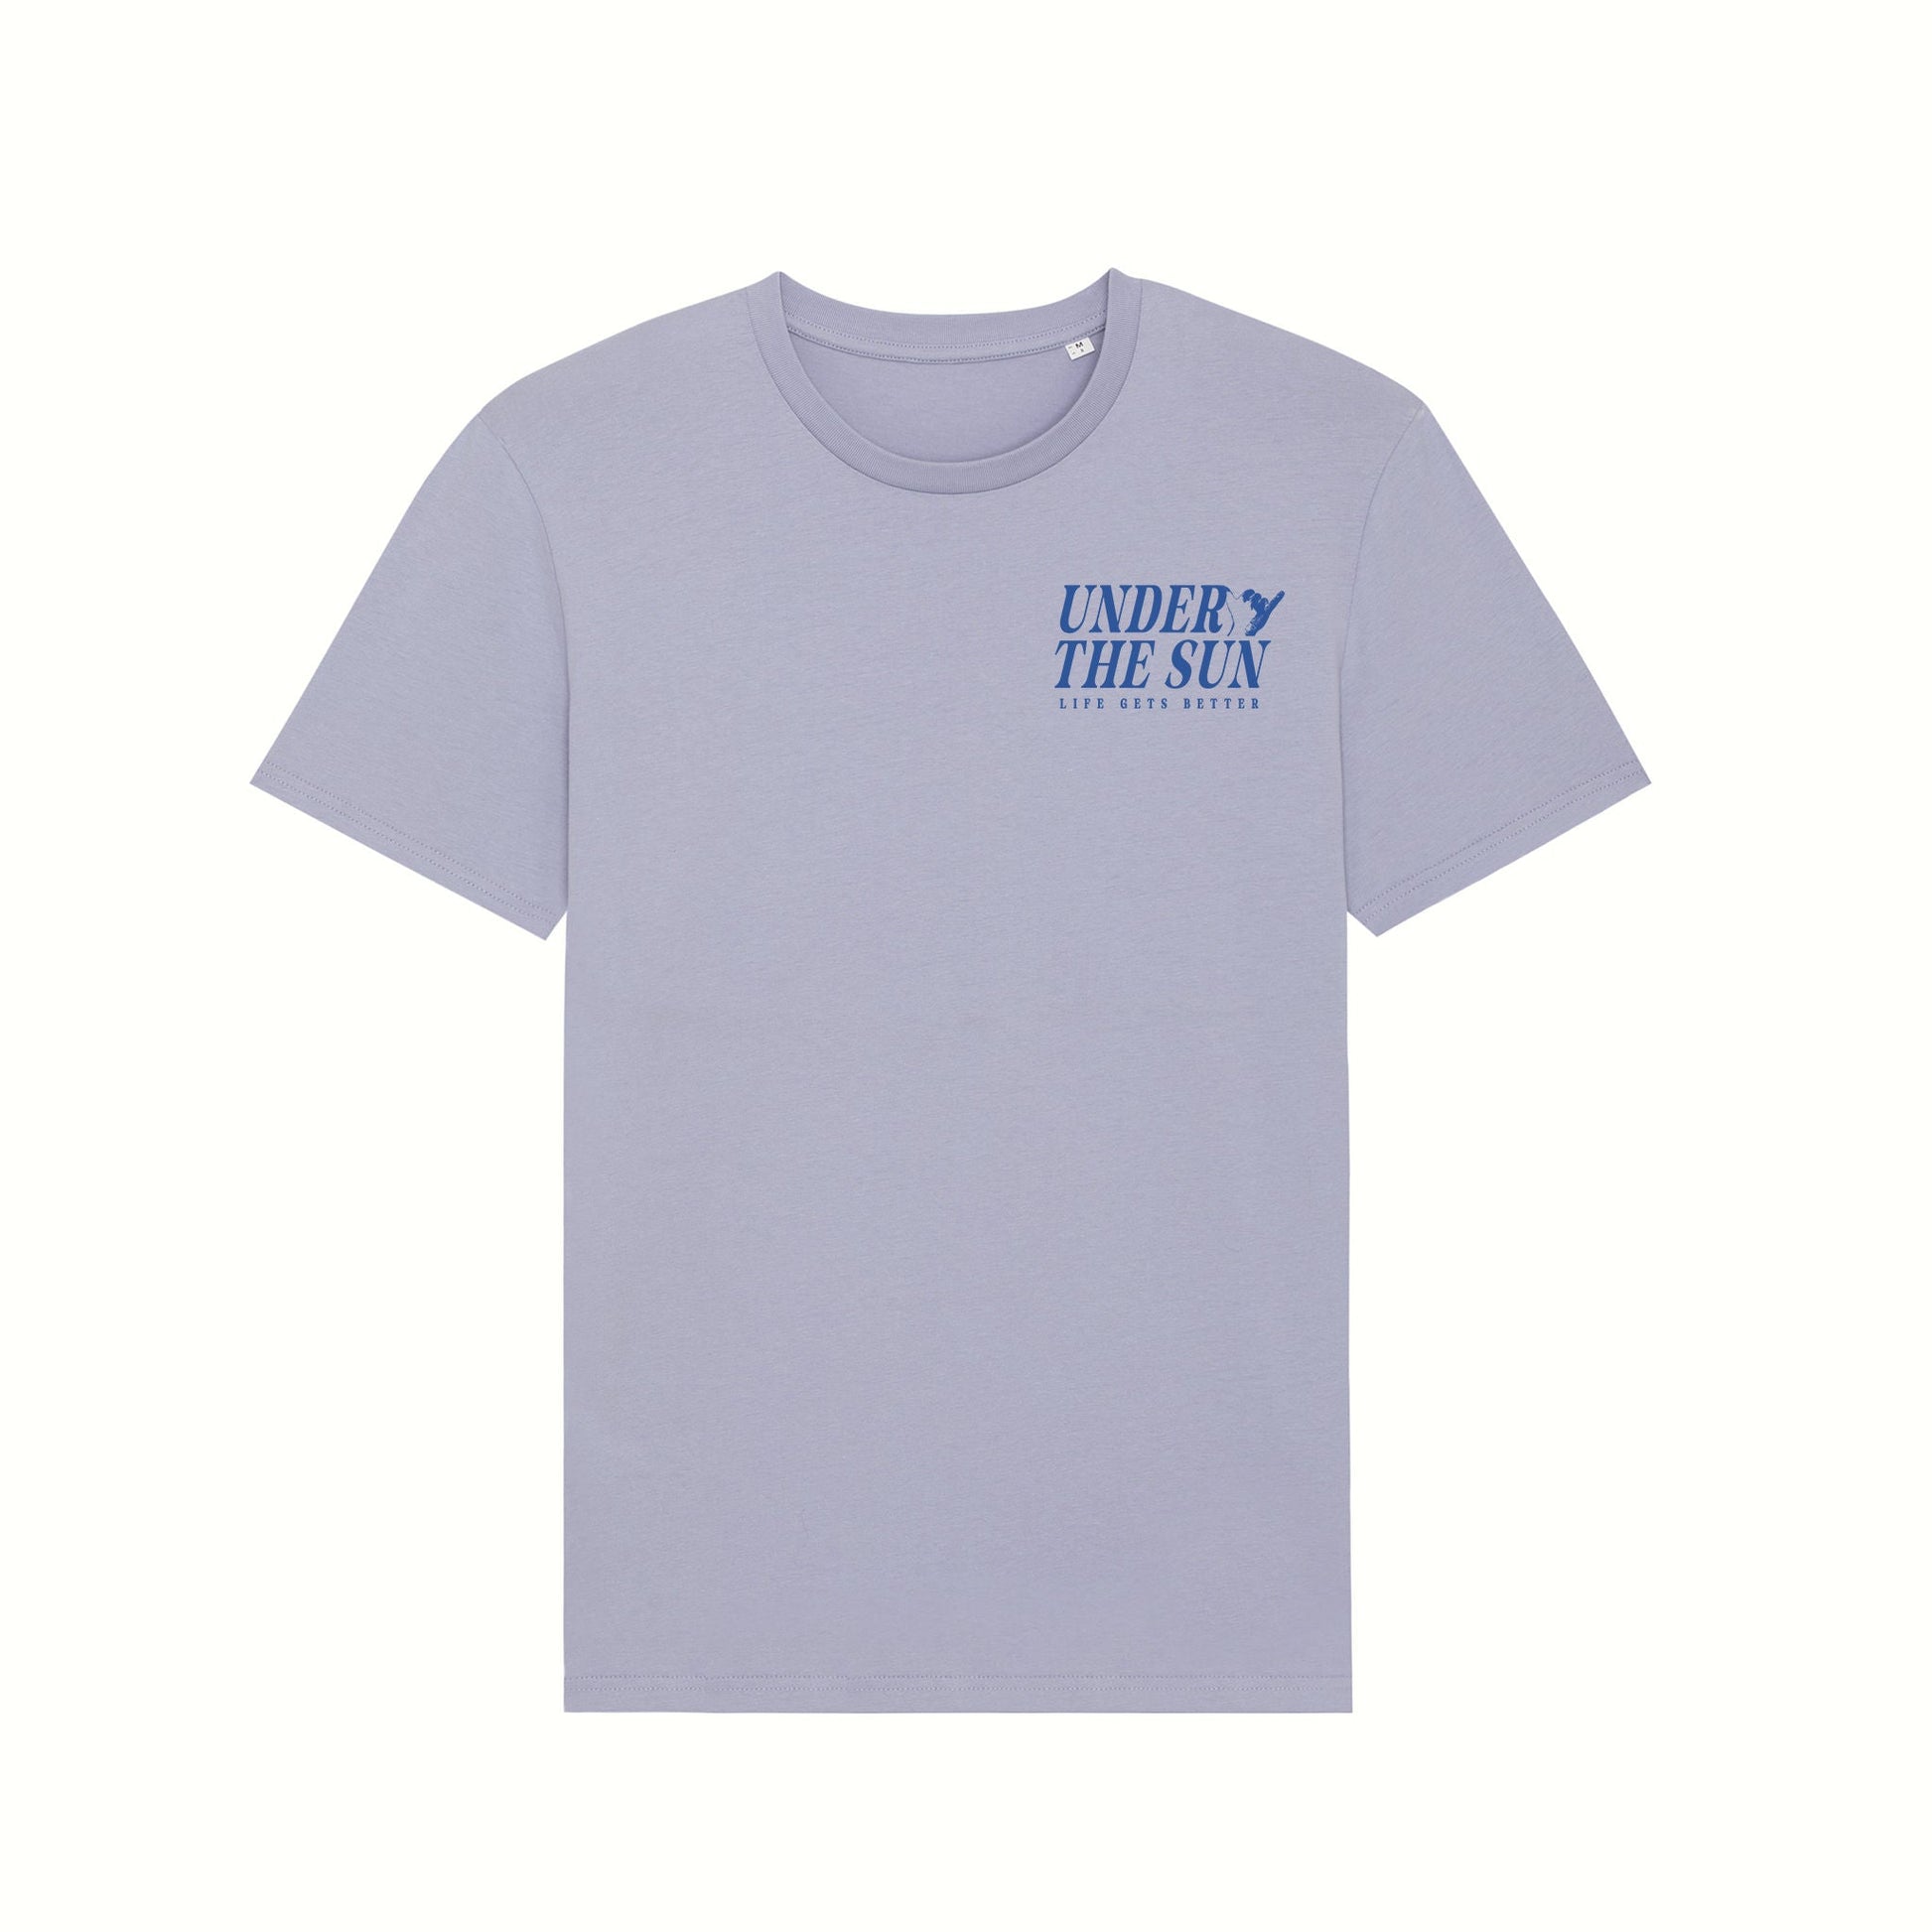 Fear The Ordinary lavender premium organic cotton t-shirt with blue cobalt under the sun summer inspired front print.